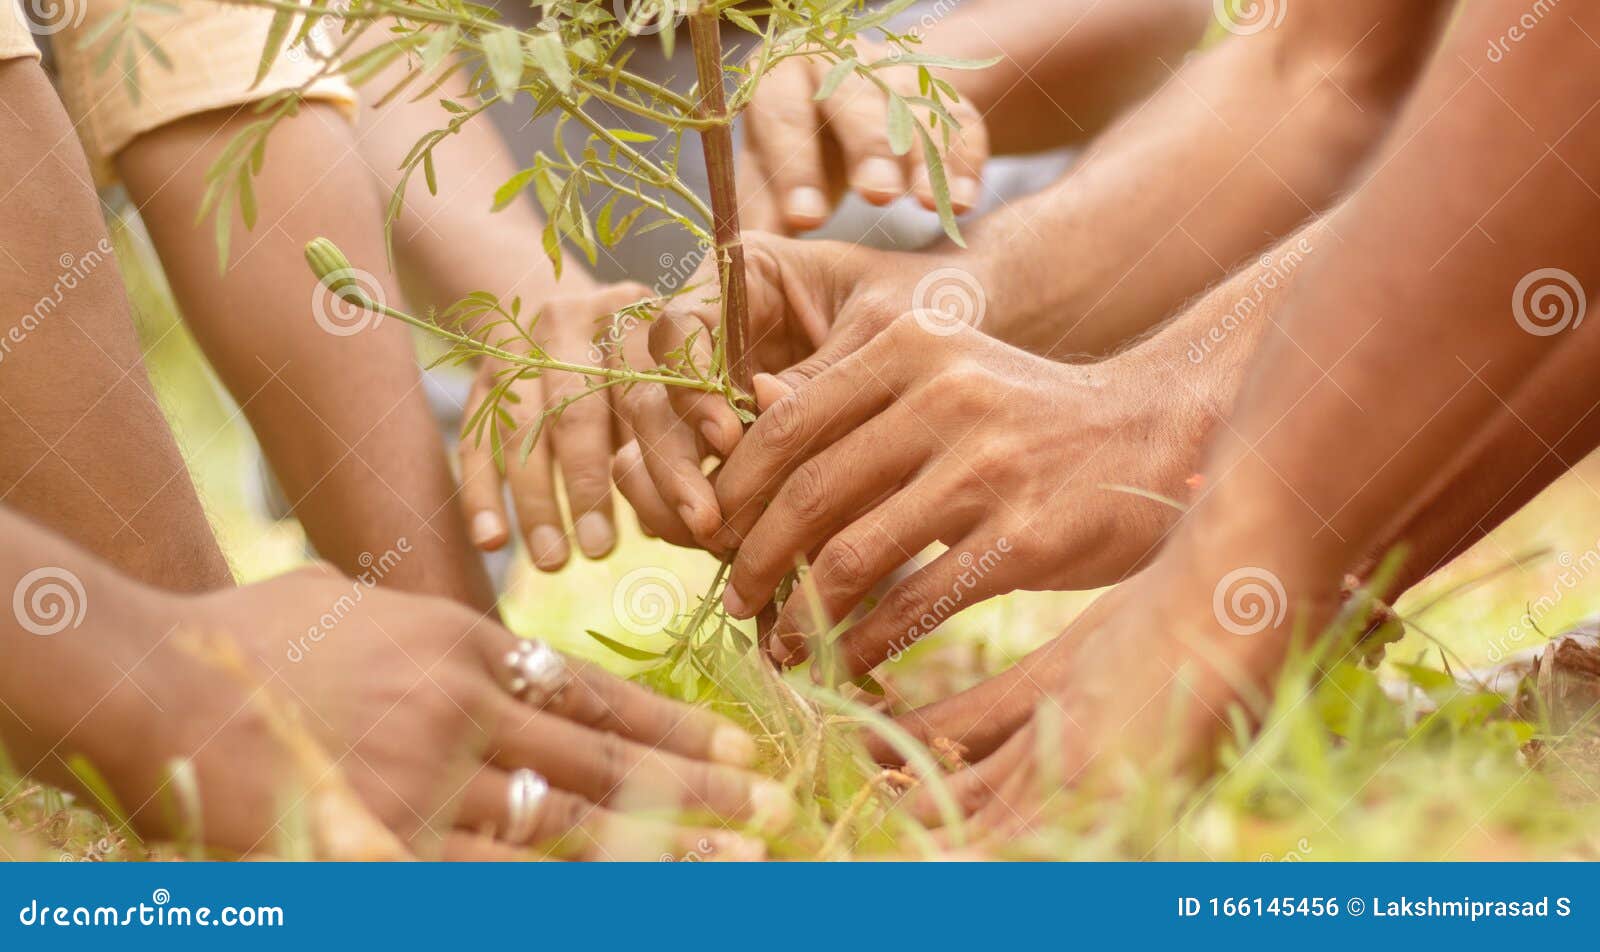 close up of people hands planting tree seedling in park - volunteering, charity, people and ecology concept to save